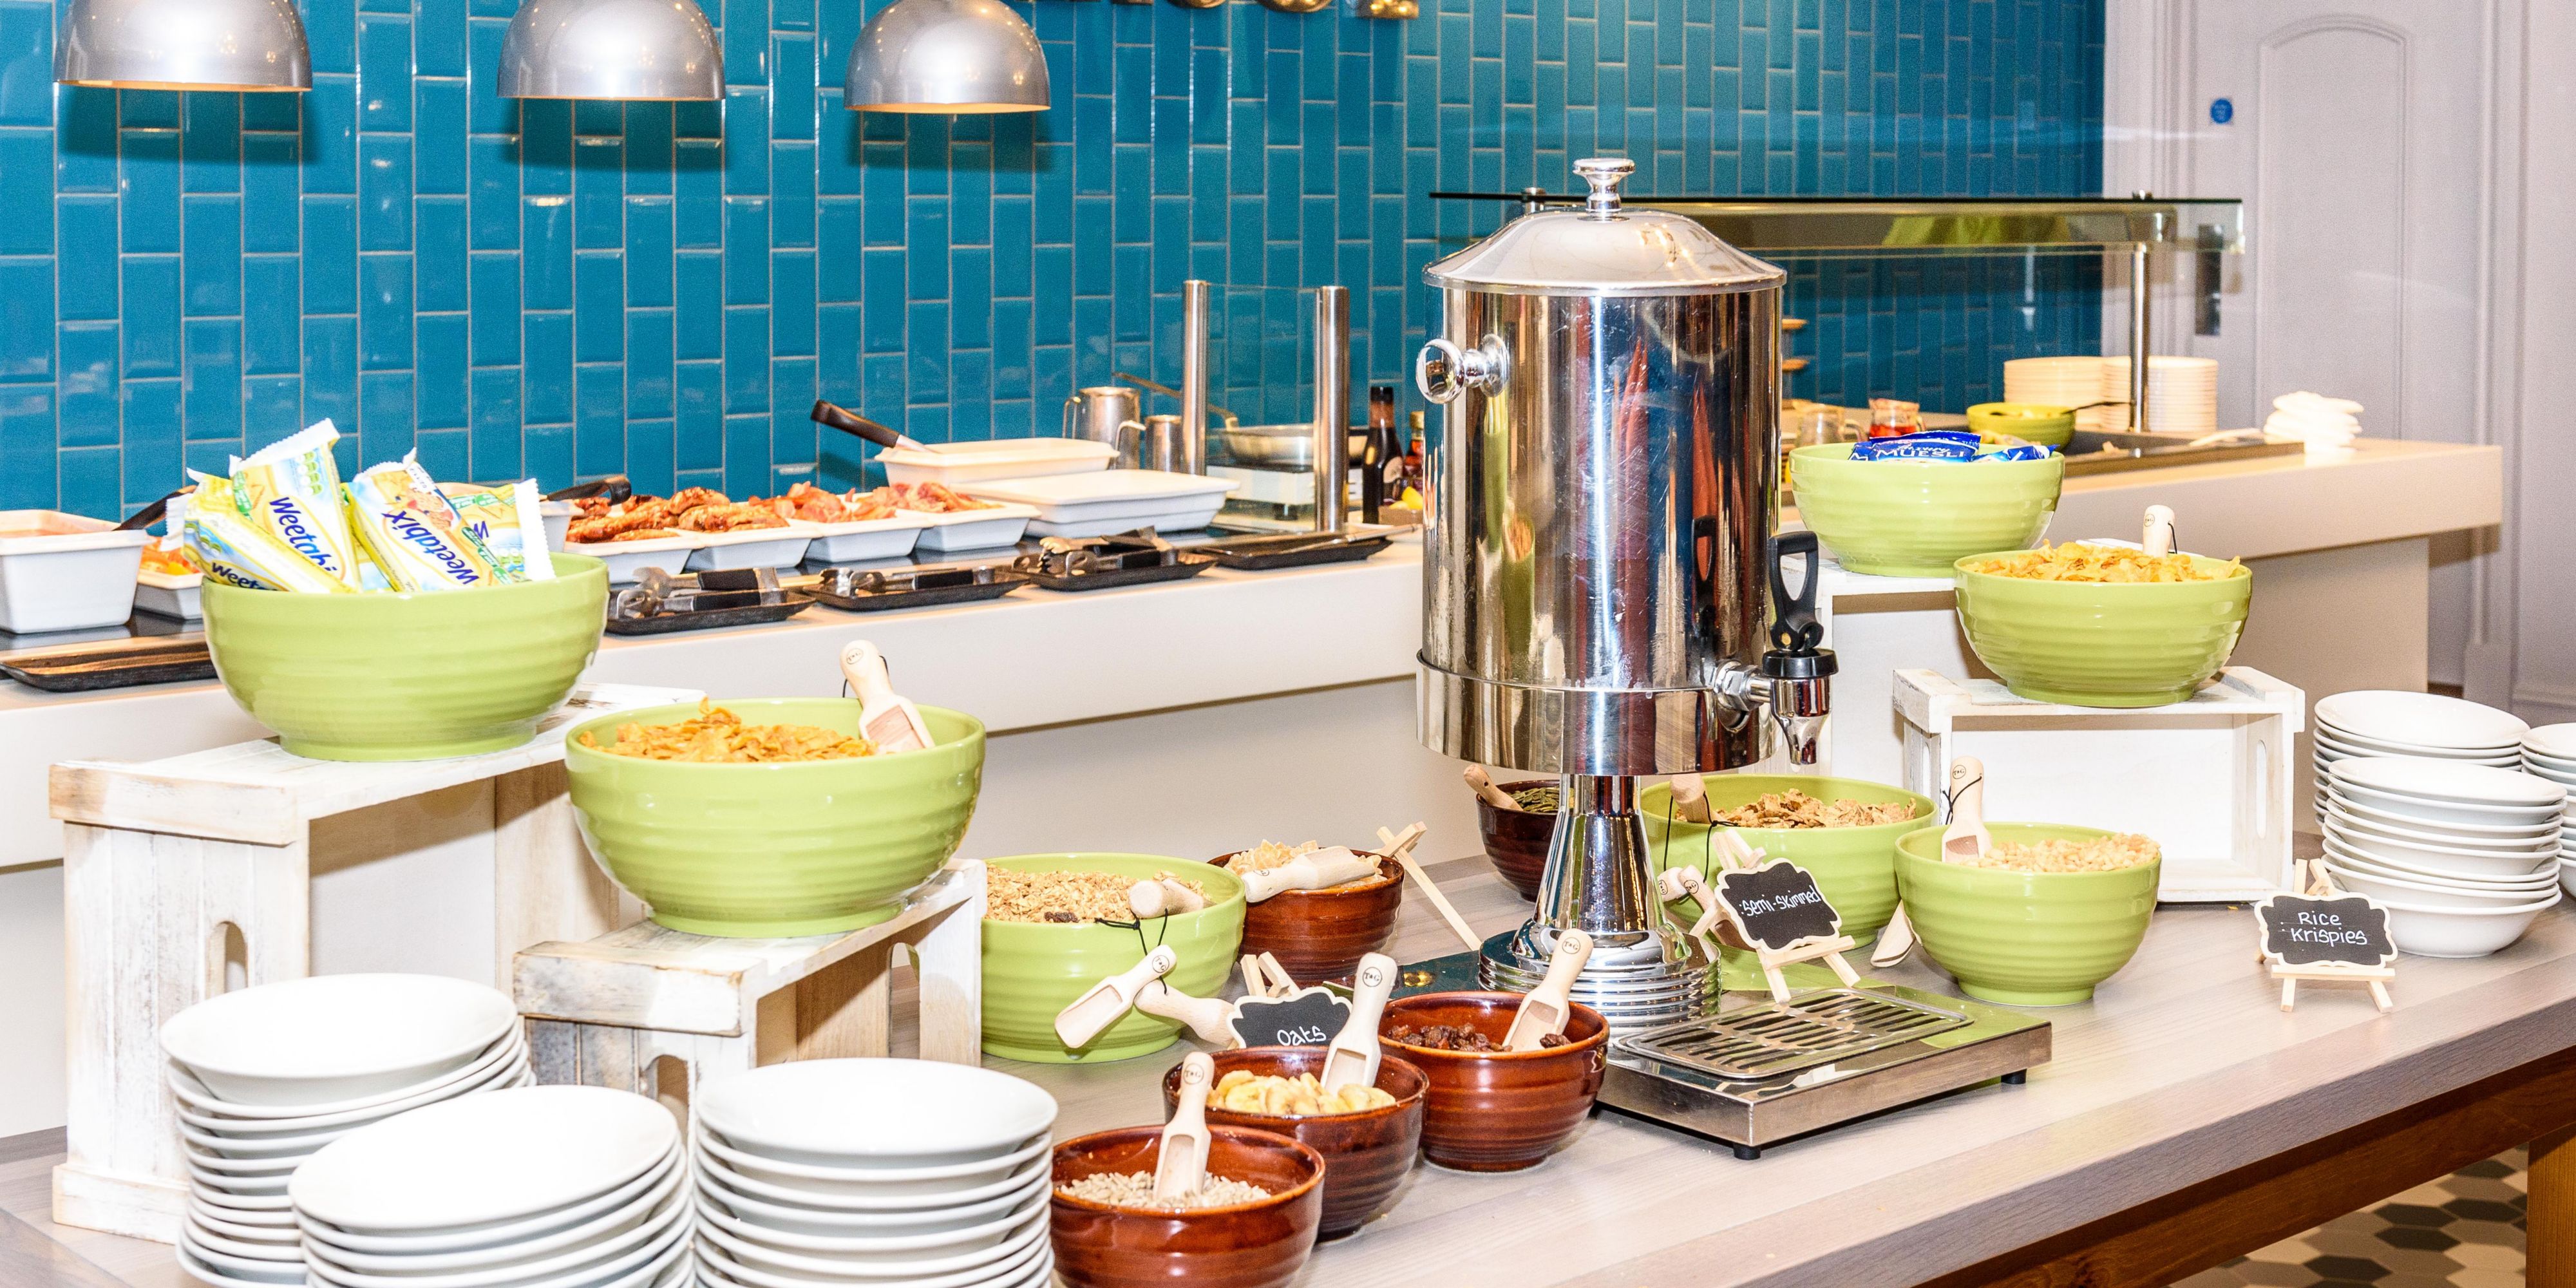 Indulge in the wide selection of food in our Breakfast Buffet.